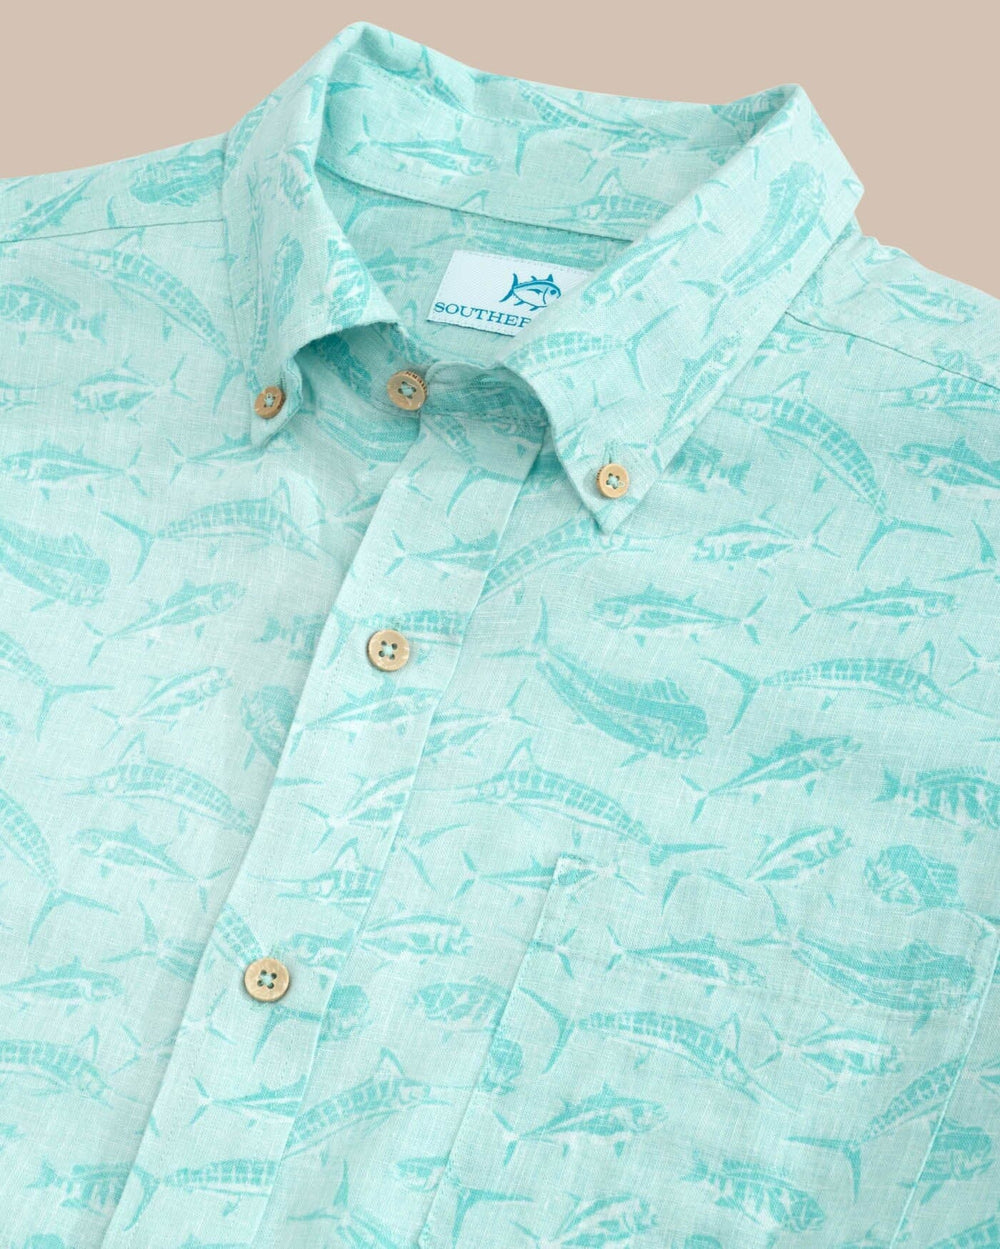 The detail view of the Southern Tide Linen Rayon You've Been Schooled Short Sleeve Sportshirt by Southern Tide - Wake Blue